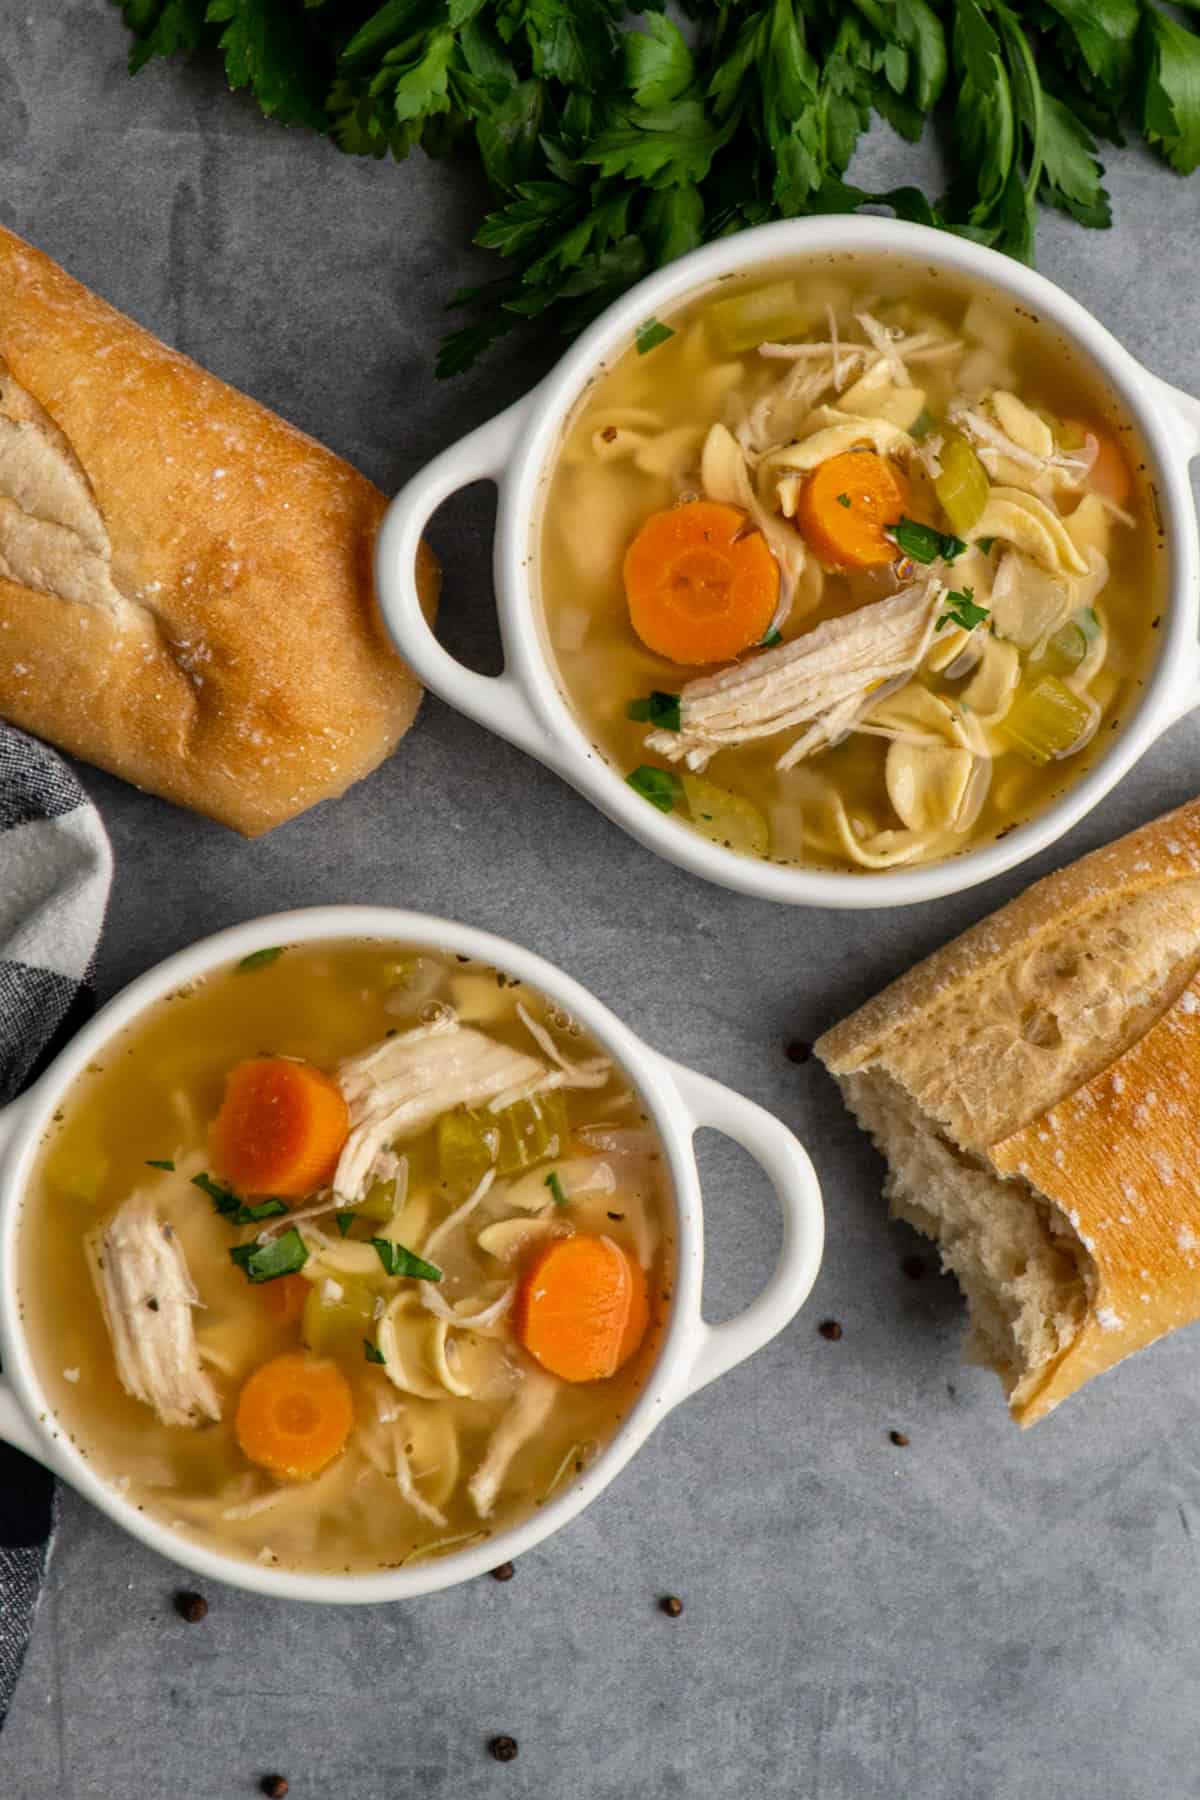 Overhead look at Crock Pot chicken noodle soup in two white bowls with bread on the side.